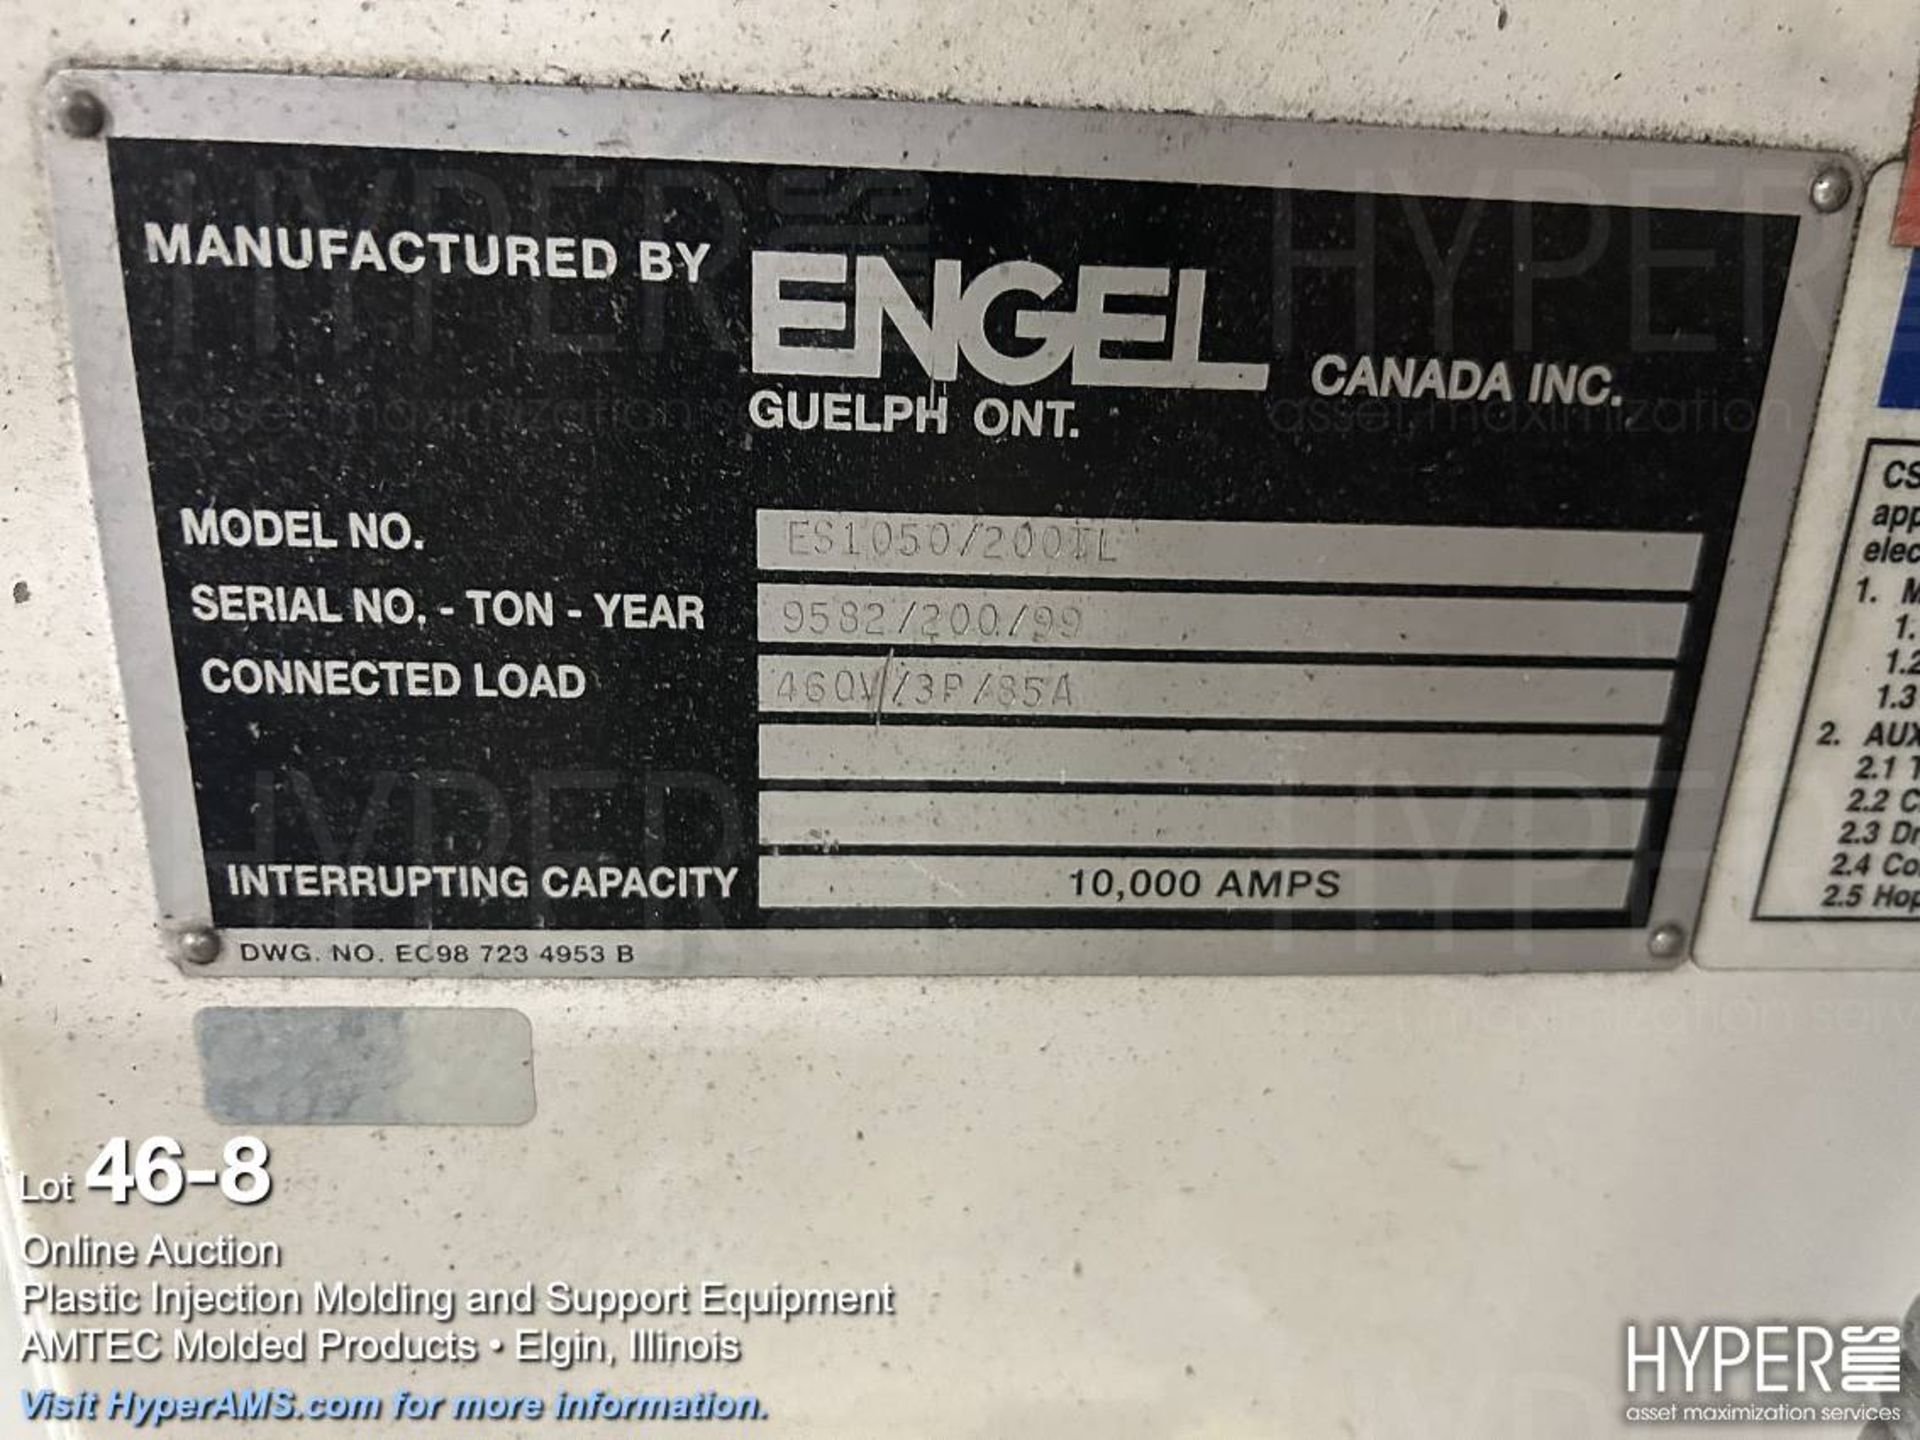 Engel ES1050/200TL toggle clamp plastic injection molding machine - Image 8 of 16